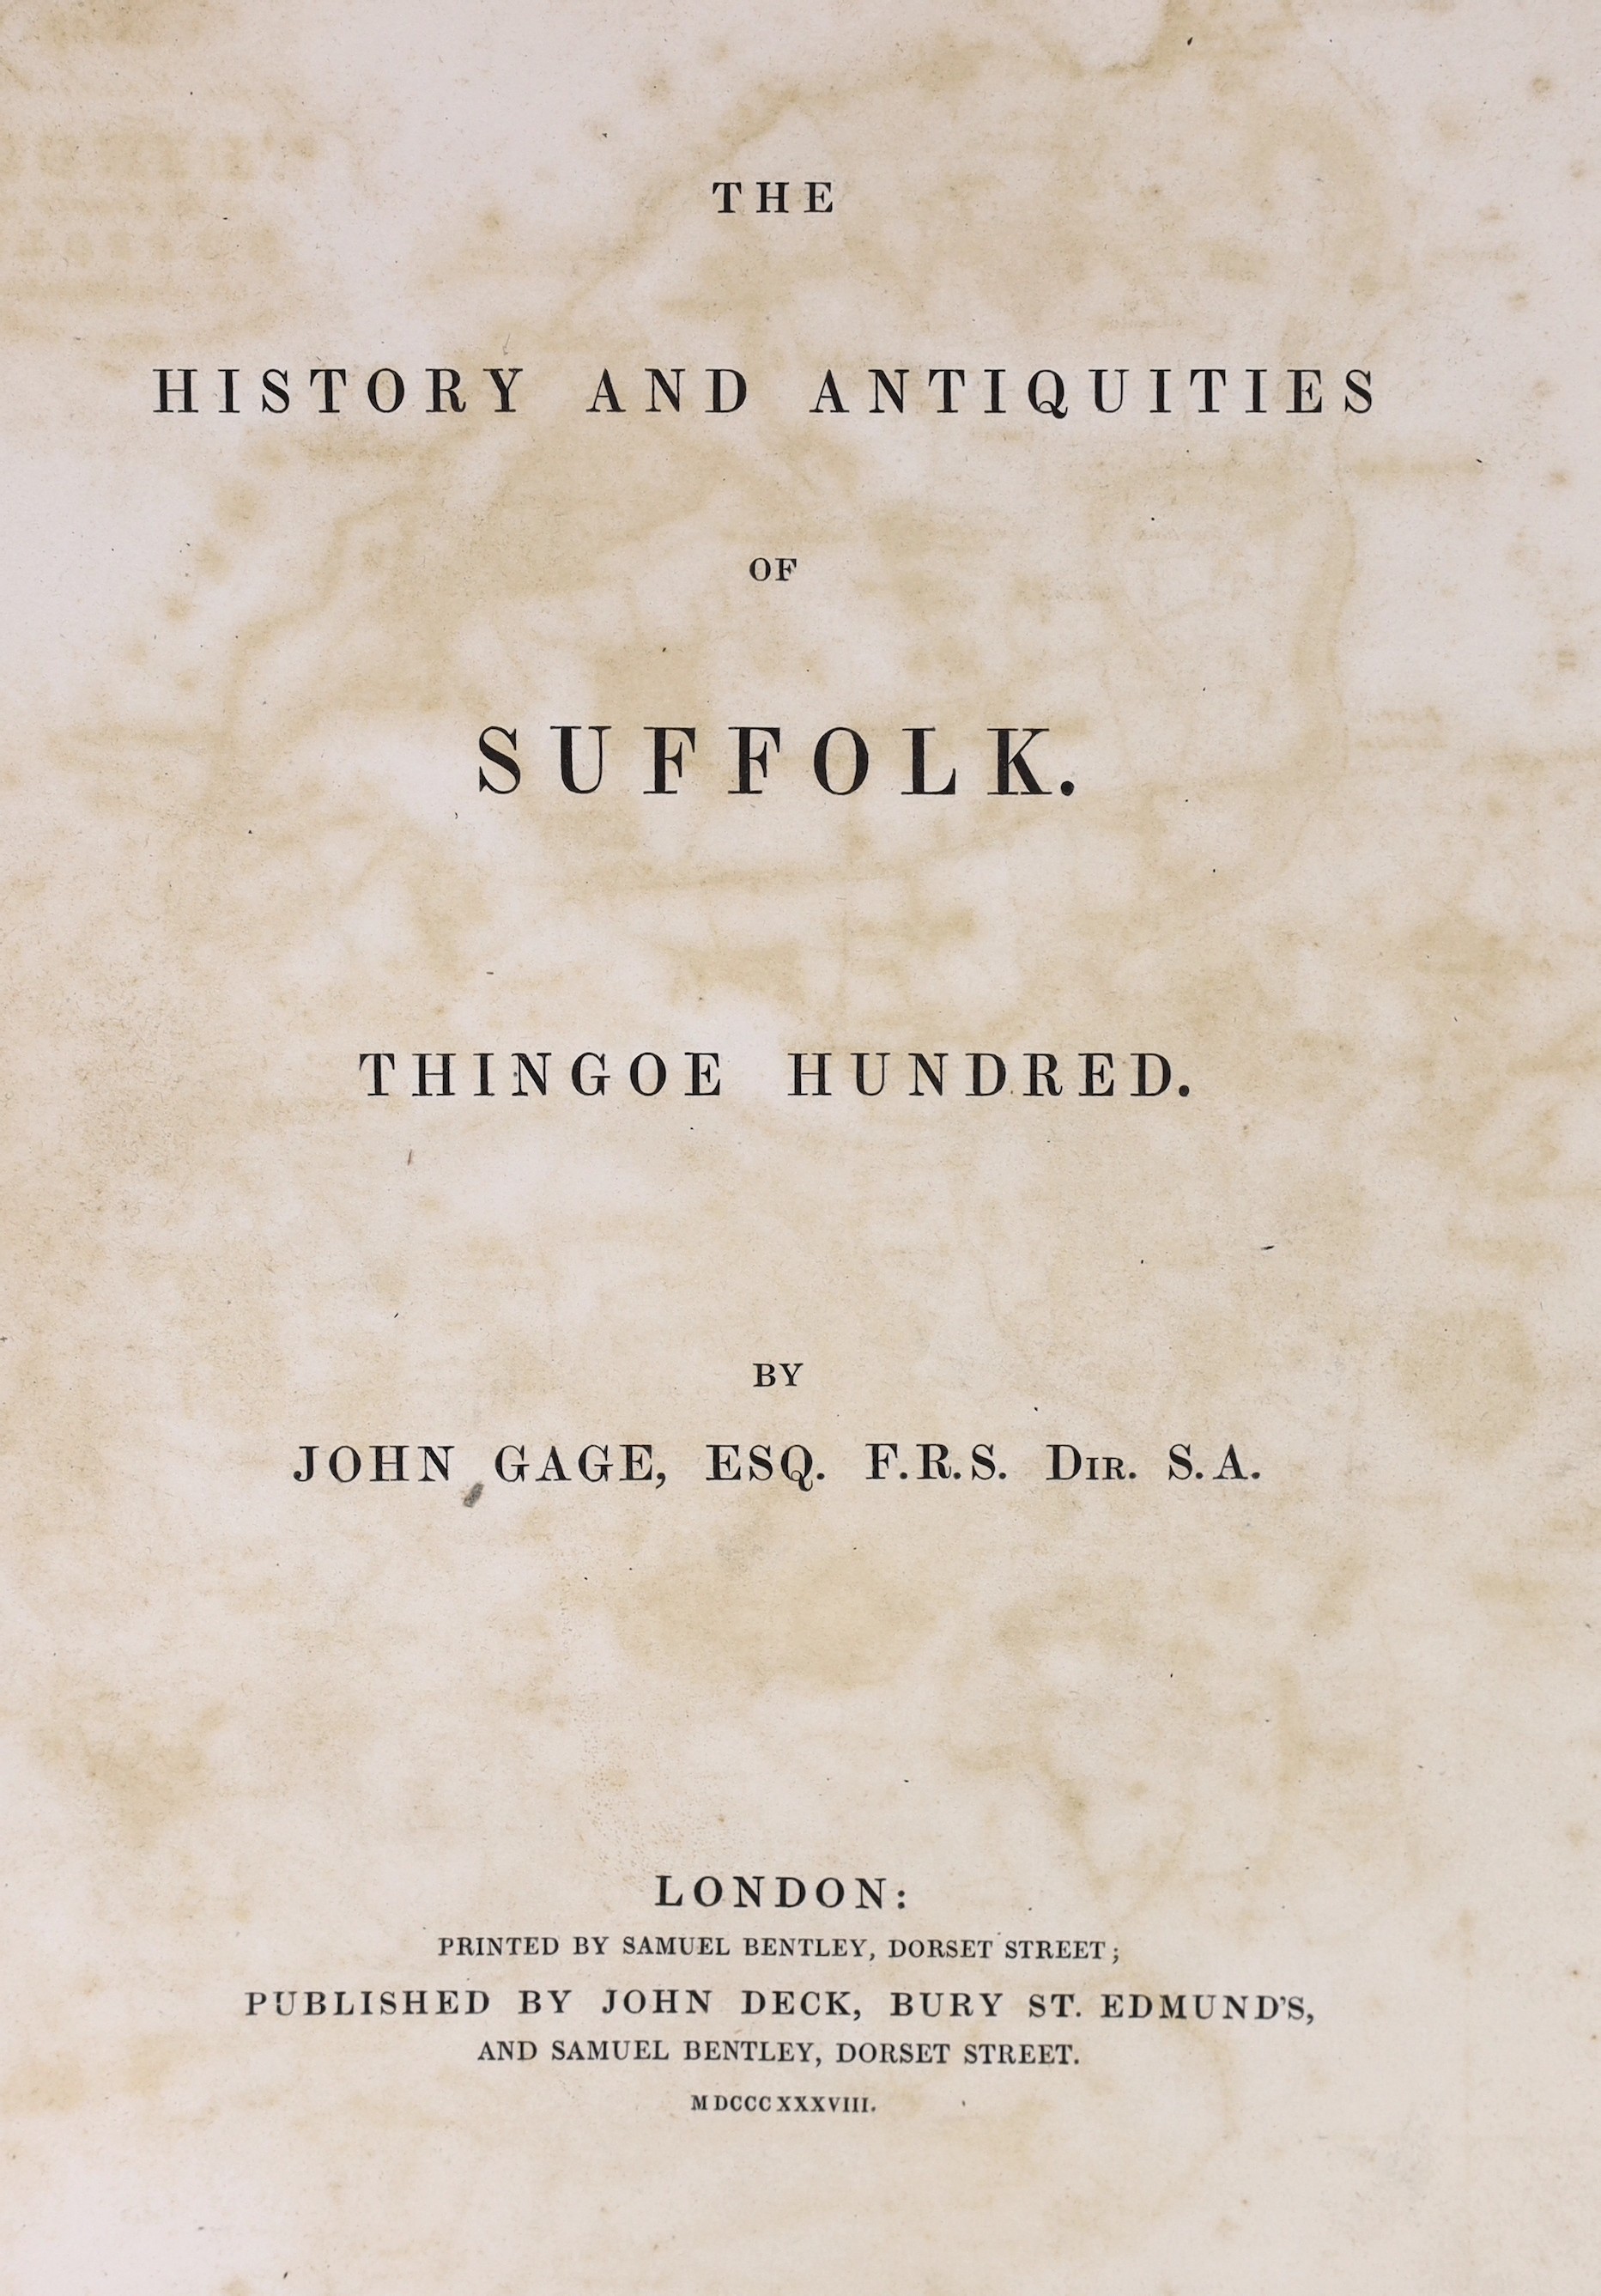 SUFFOLK: Gage, John - The History and Antiquities of Suffolk. Thingoe Hundred. 7 maps and plans (2 with outline colour, 1 pictorial), 27 plates (4 tinted), 2 mezzotint portraits, some full-page pedigrees and text engravi